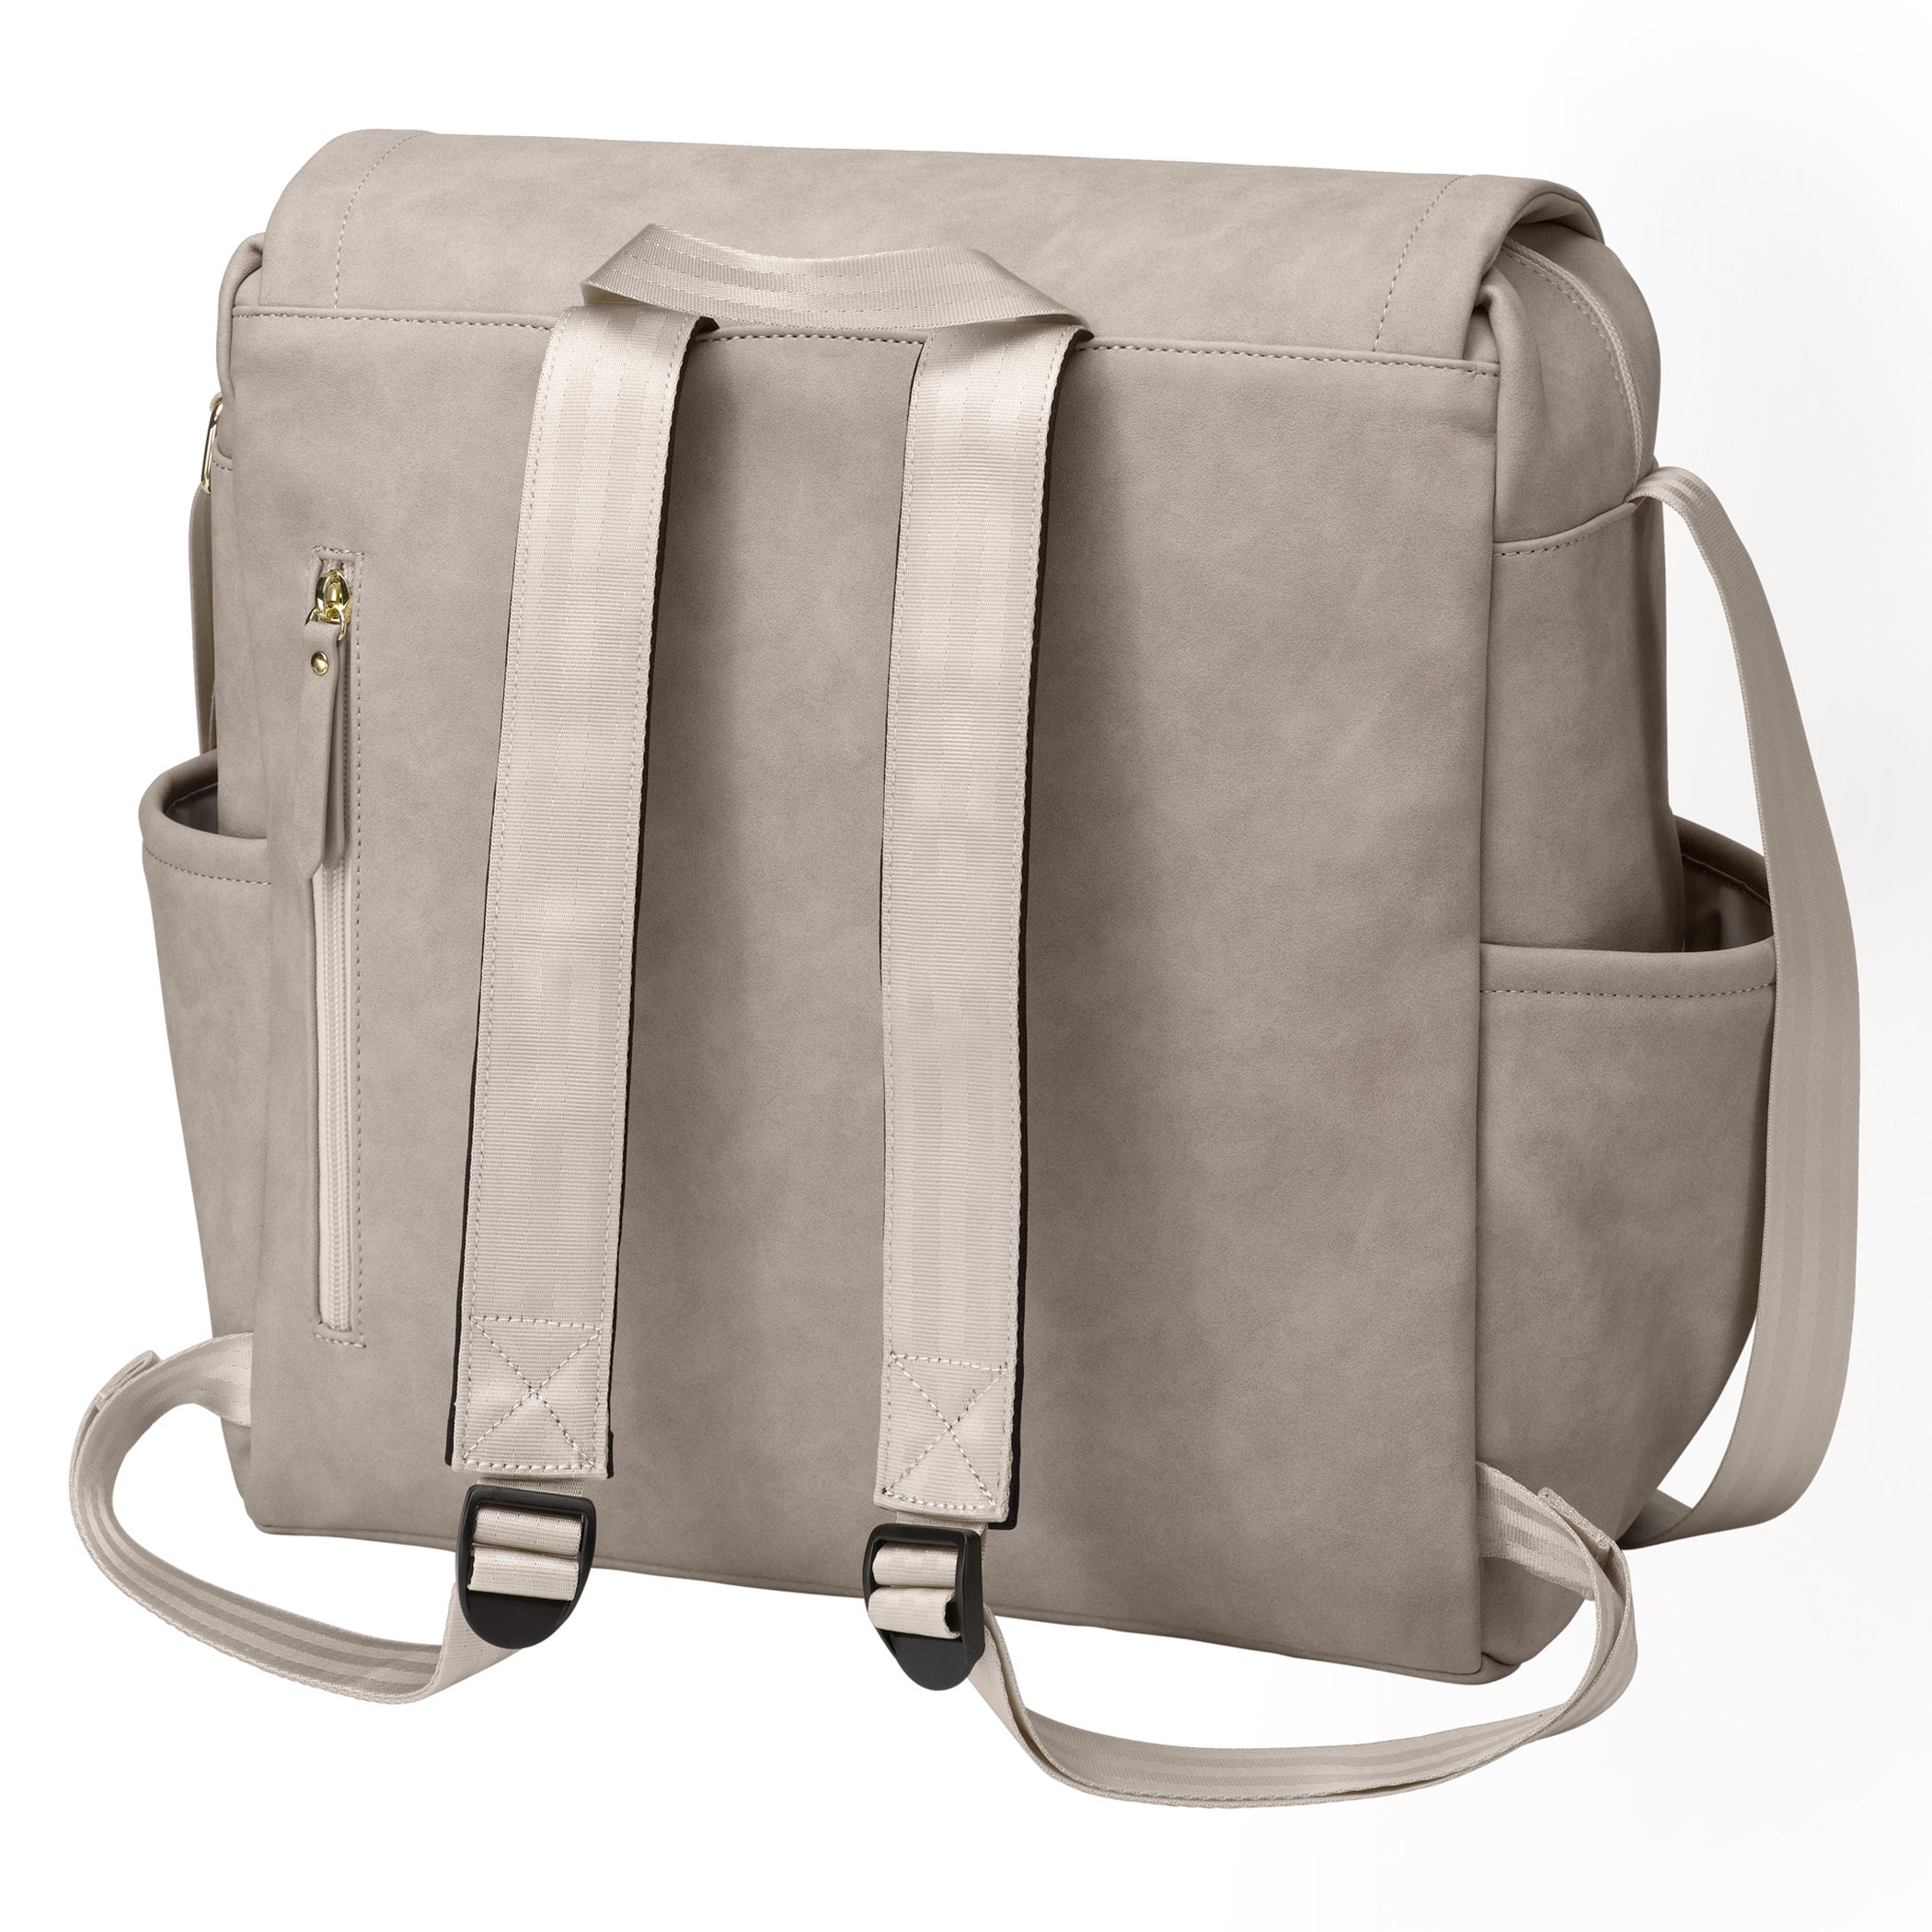 Petunia Pickle Bottom Boxy Diaper Backpack in Grey Matte Leatherette